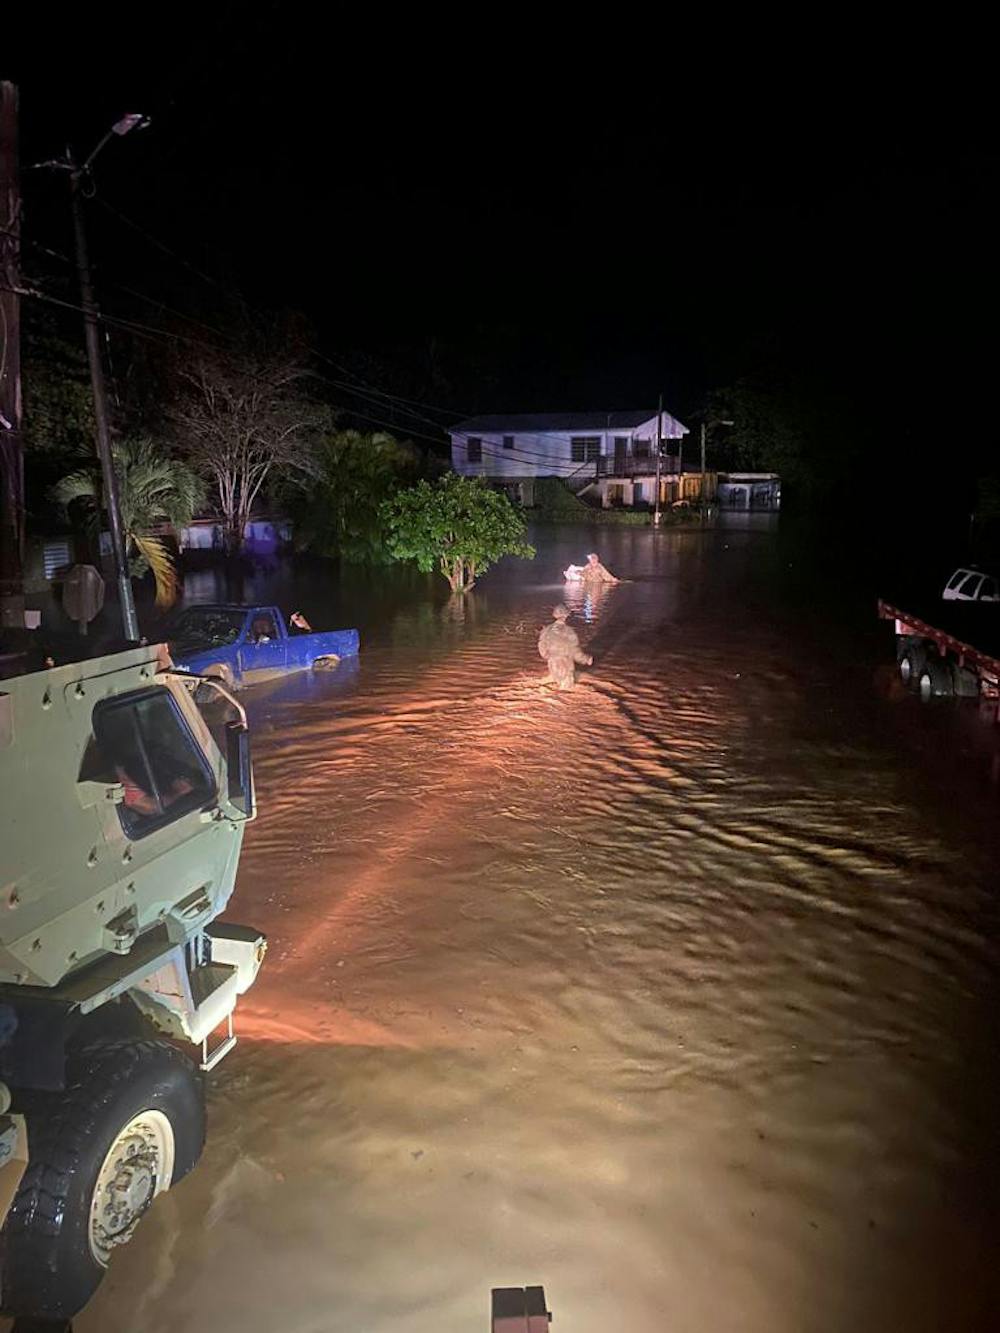 <p>With winds of up to 130 mph, Hurricane Fiona has caused more than 1,000,000 people to live without running water or electricity, and the rainfall has contributed to countless landslides and flooding (Flickr/“<a href="https://www.flickr.com/photos/thenationalguard/52369664378/in/photolist-8x5MeG-C2rMpY-2nMKagT-2nMCckd-2nMJdFU-8xyMBm-2nMJBGQ-2nMJdHx-2nNjCnH" target="">The National Guard</a>” by Puerto Rico National Guard. September 19, 2022). </p>